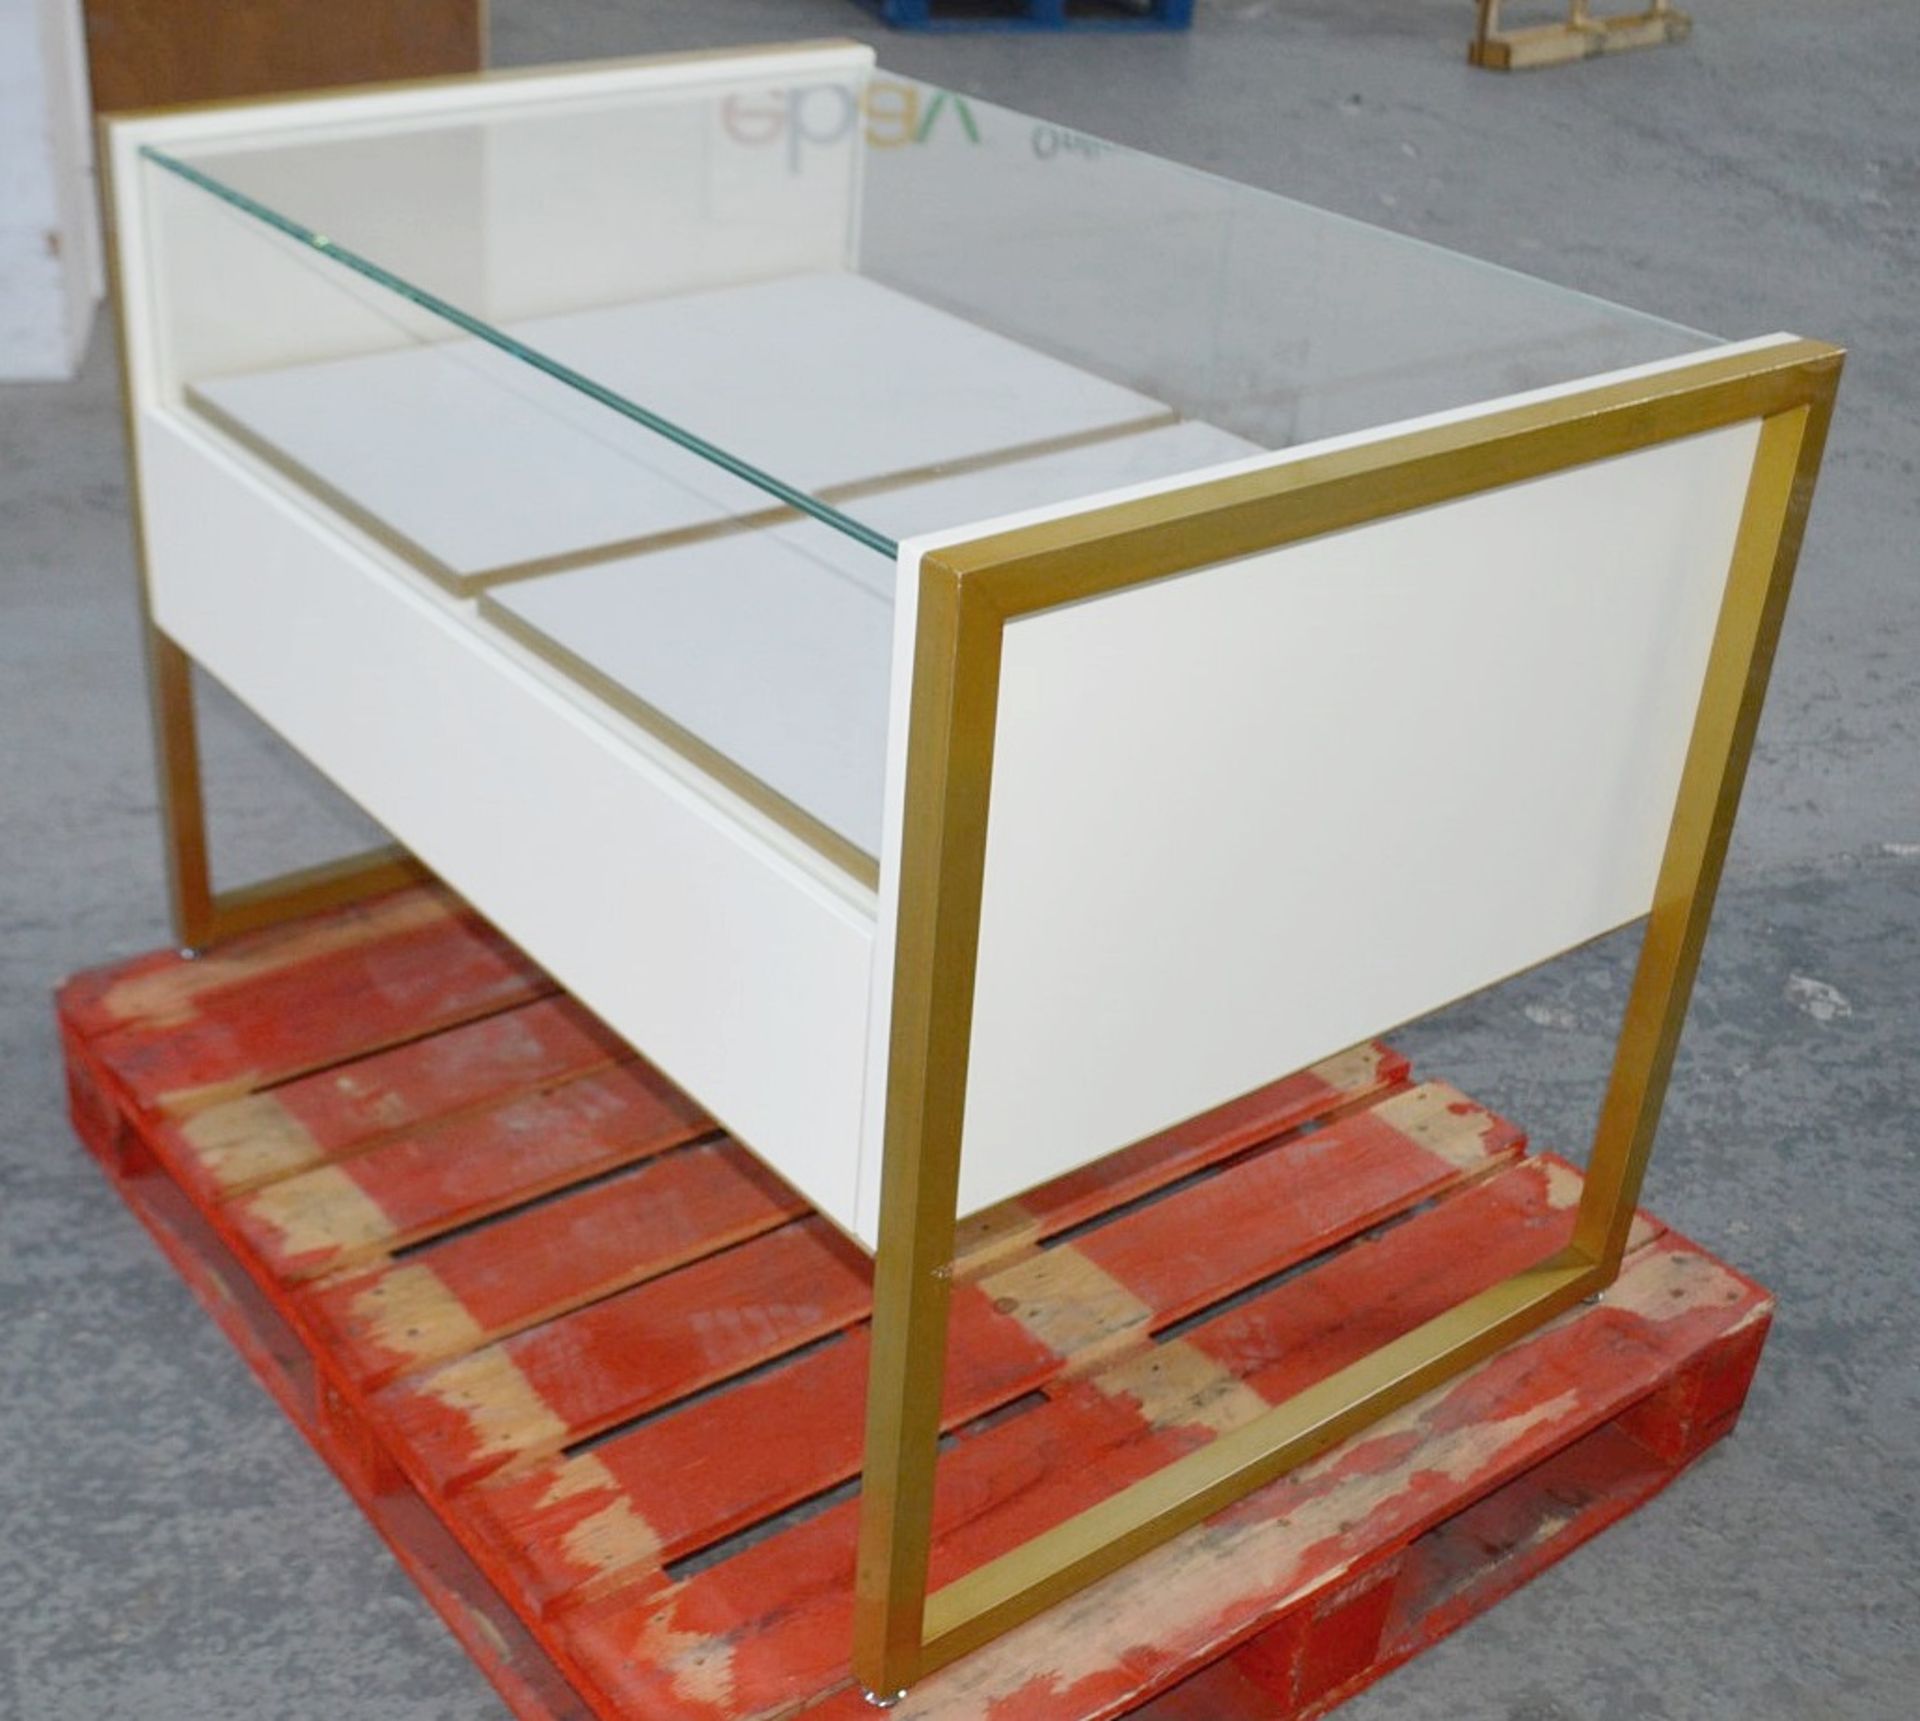 1 x Freestanding Jewellery Display Cabinet Featuring 2 x Pull-Out Trays With Leather Inserts - Image 7 of 7